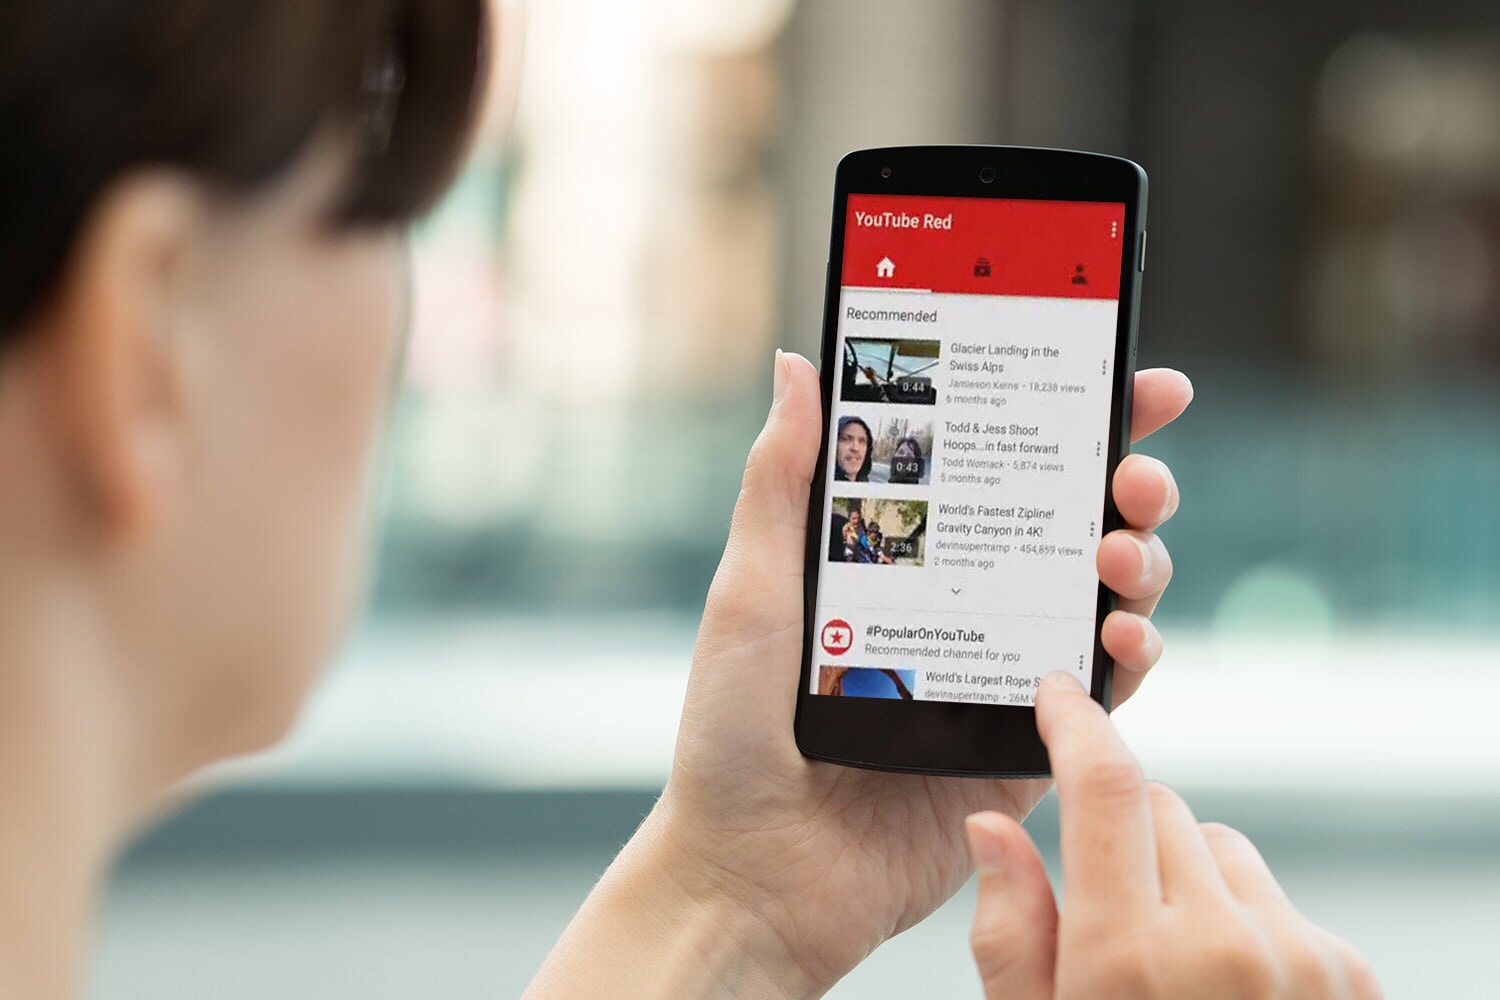 YouTube reportedly planning to invest ‘hundreds of million’ on Red originals